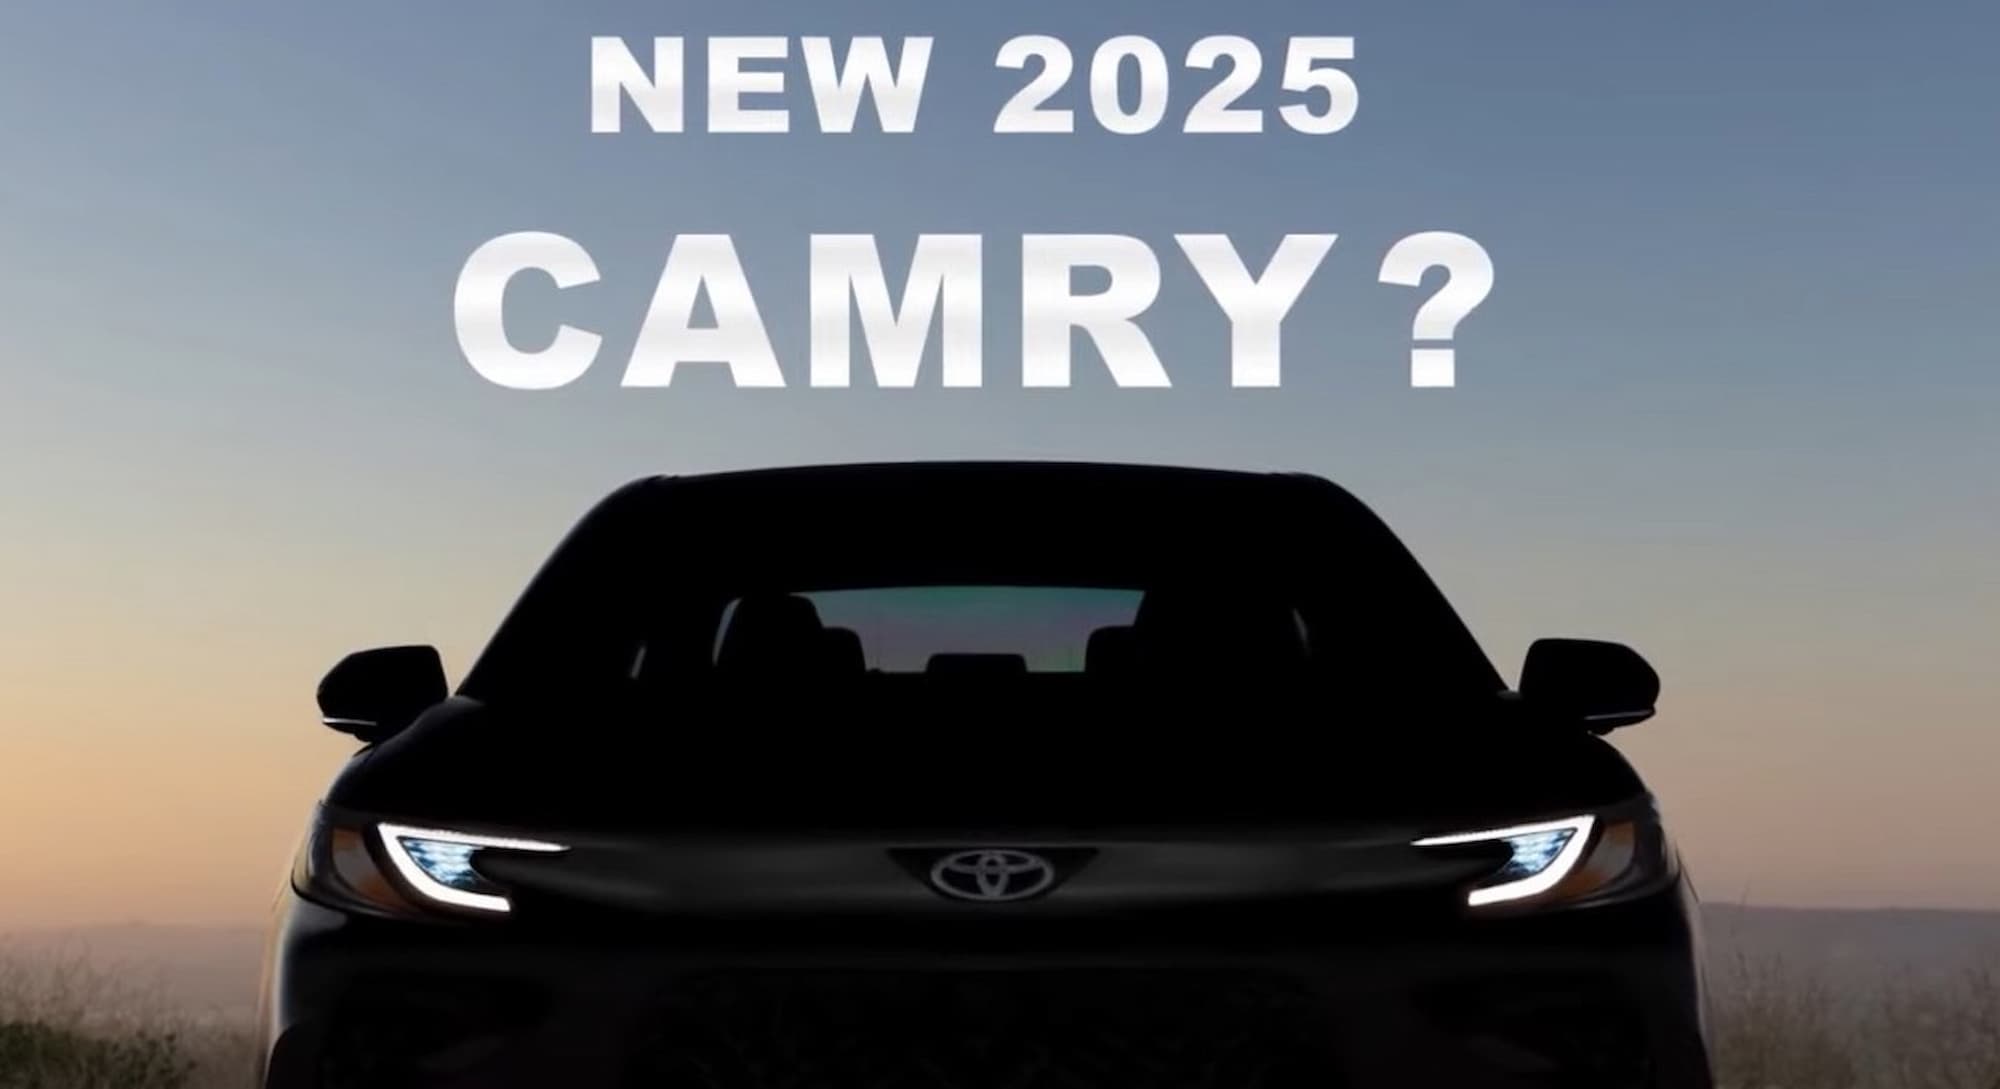 all new 2025 toyota camry xv80 features a simple yet tasty imaginary redesign 7